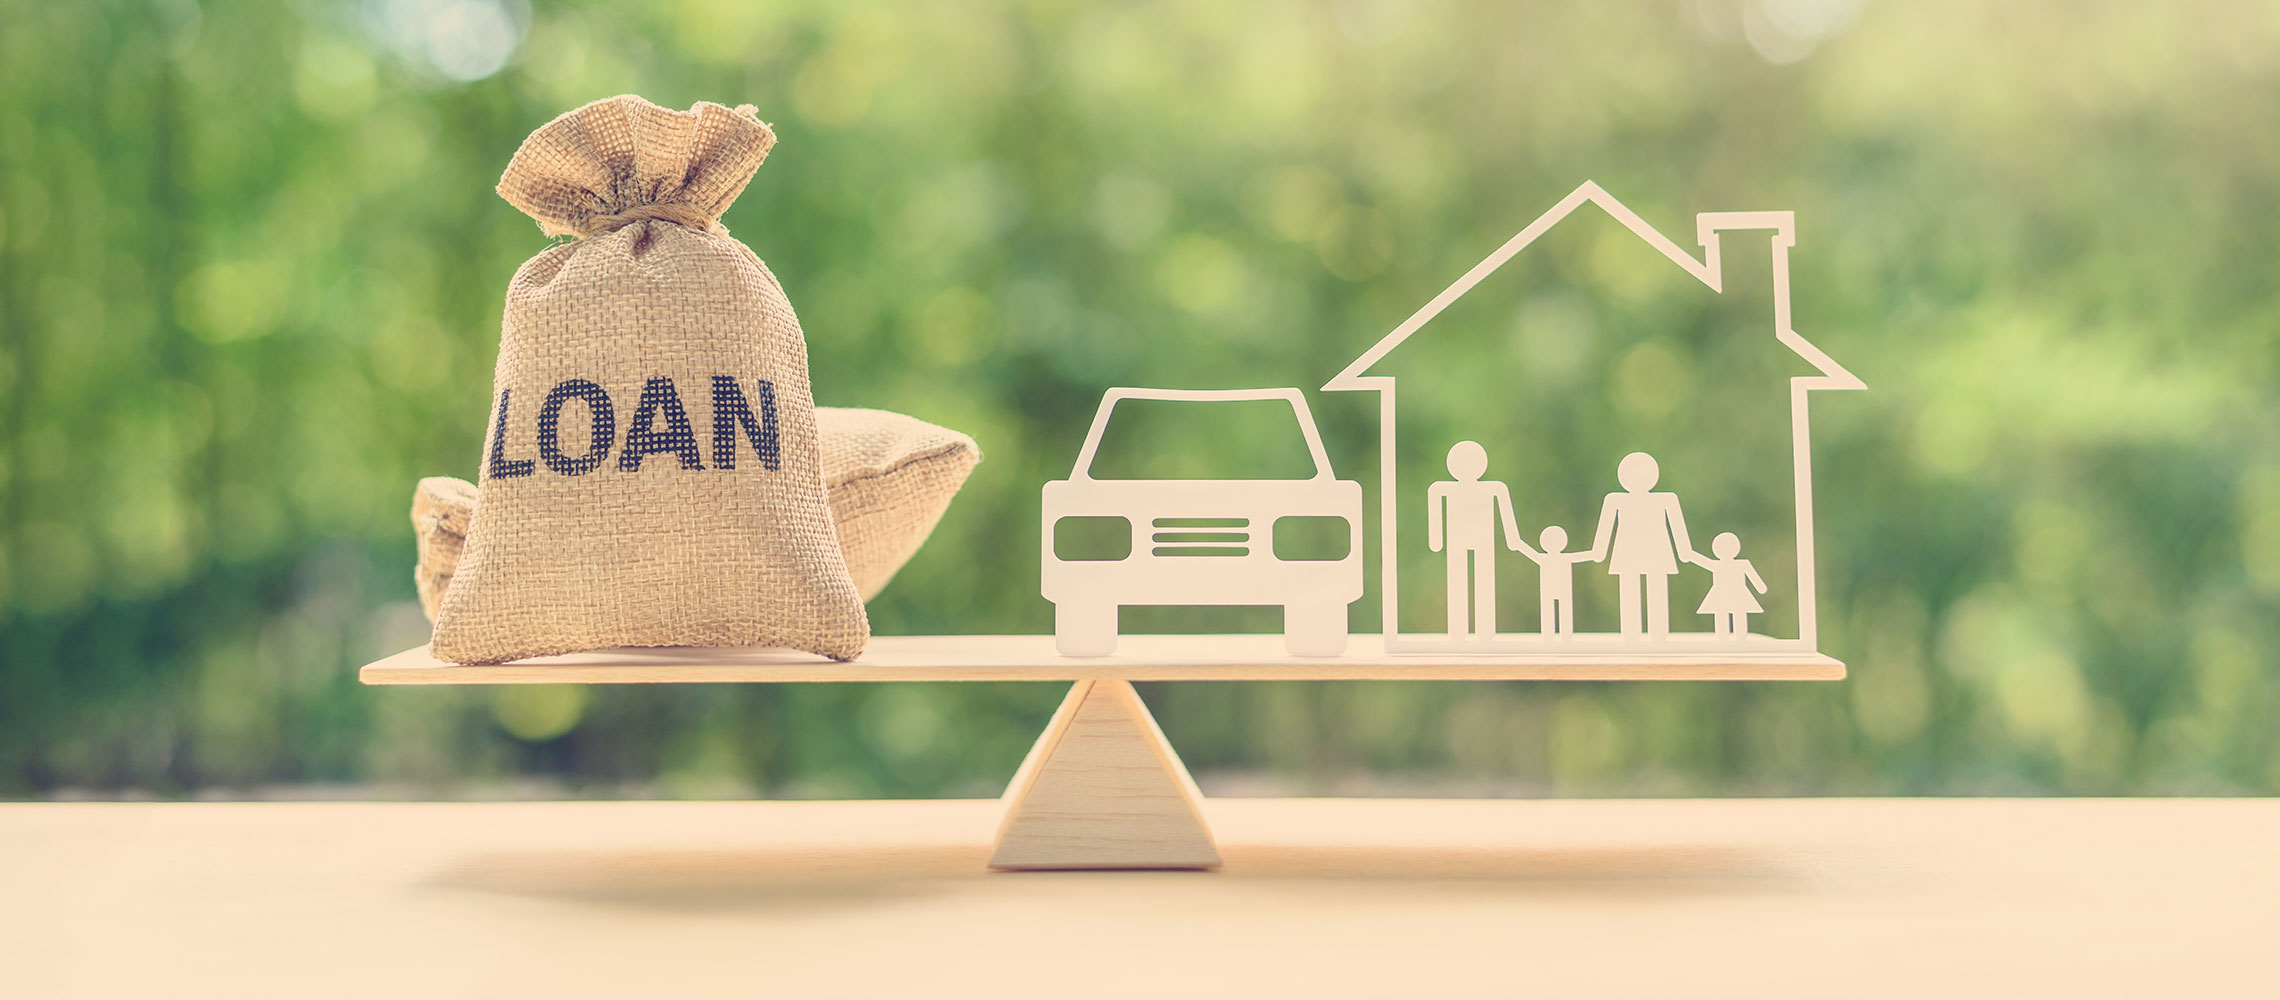 bag titled loan on scale with car and house wooden cutouts